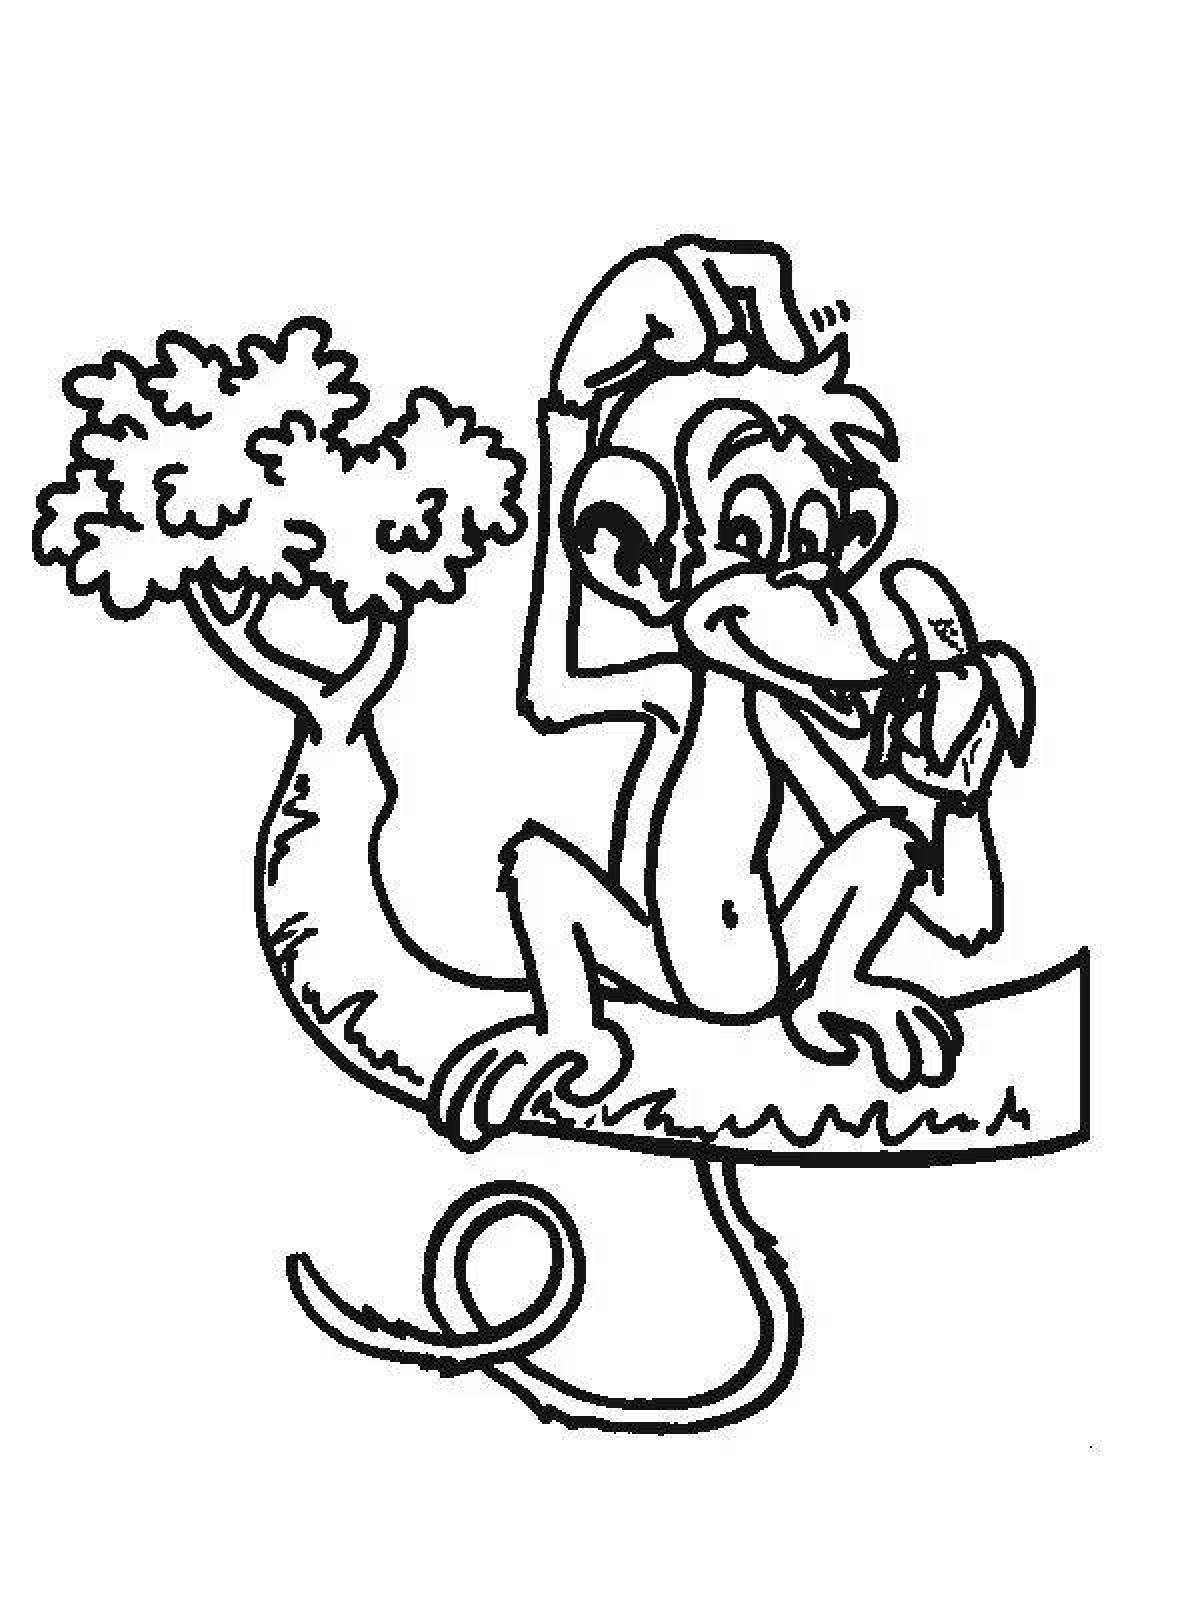 Chipper monkey and glasses coloring page